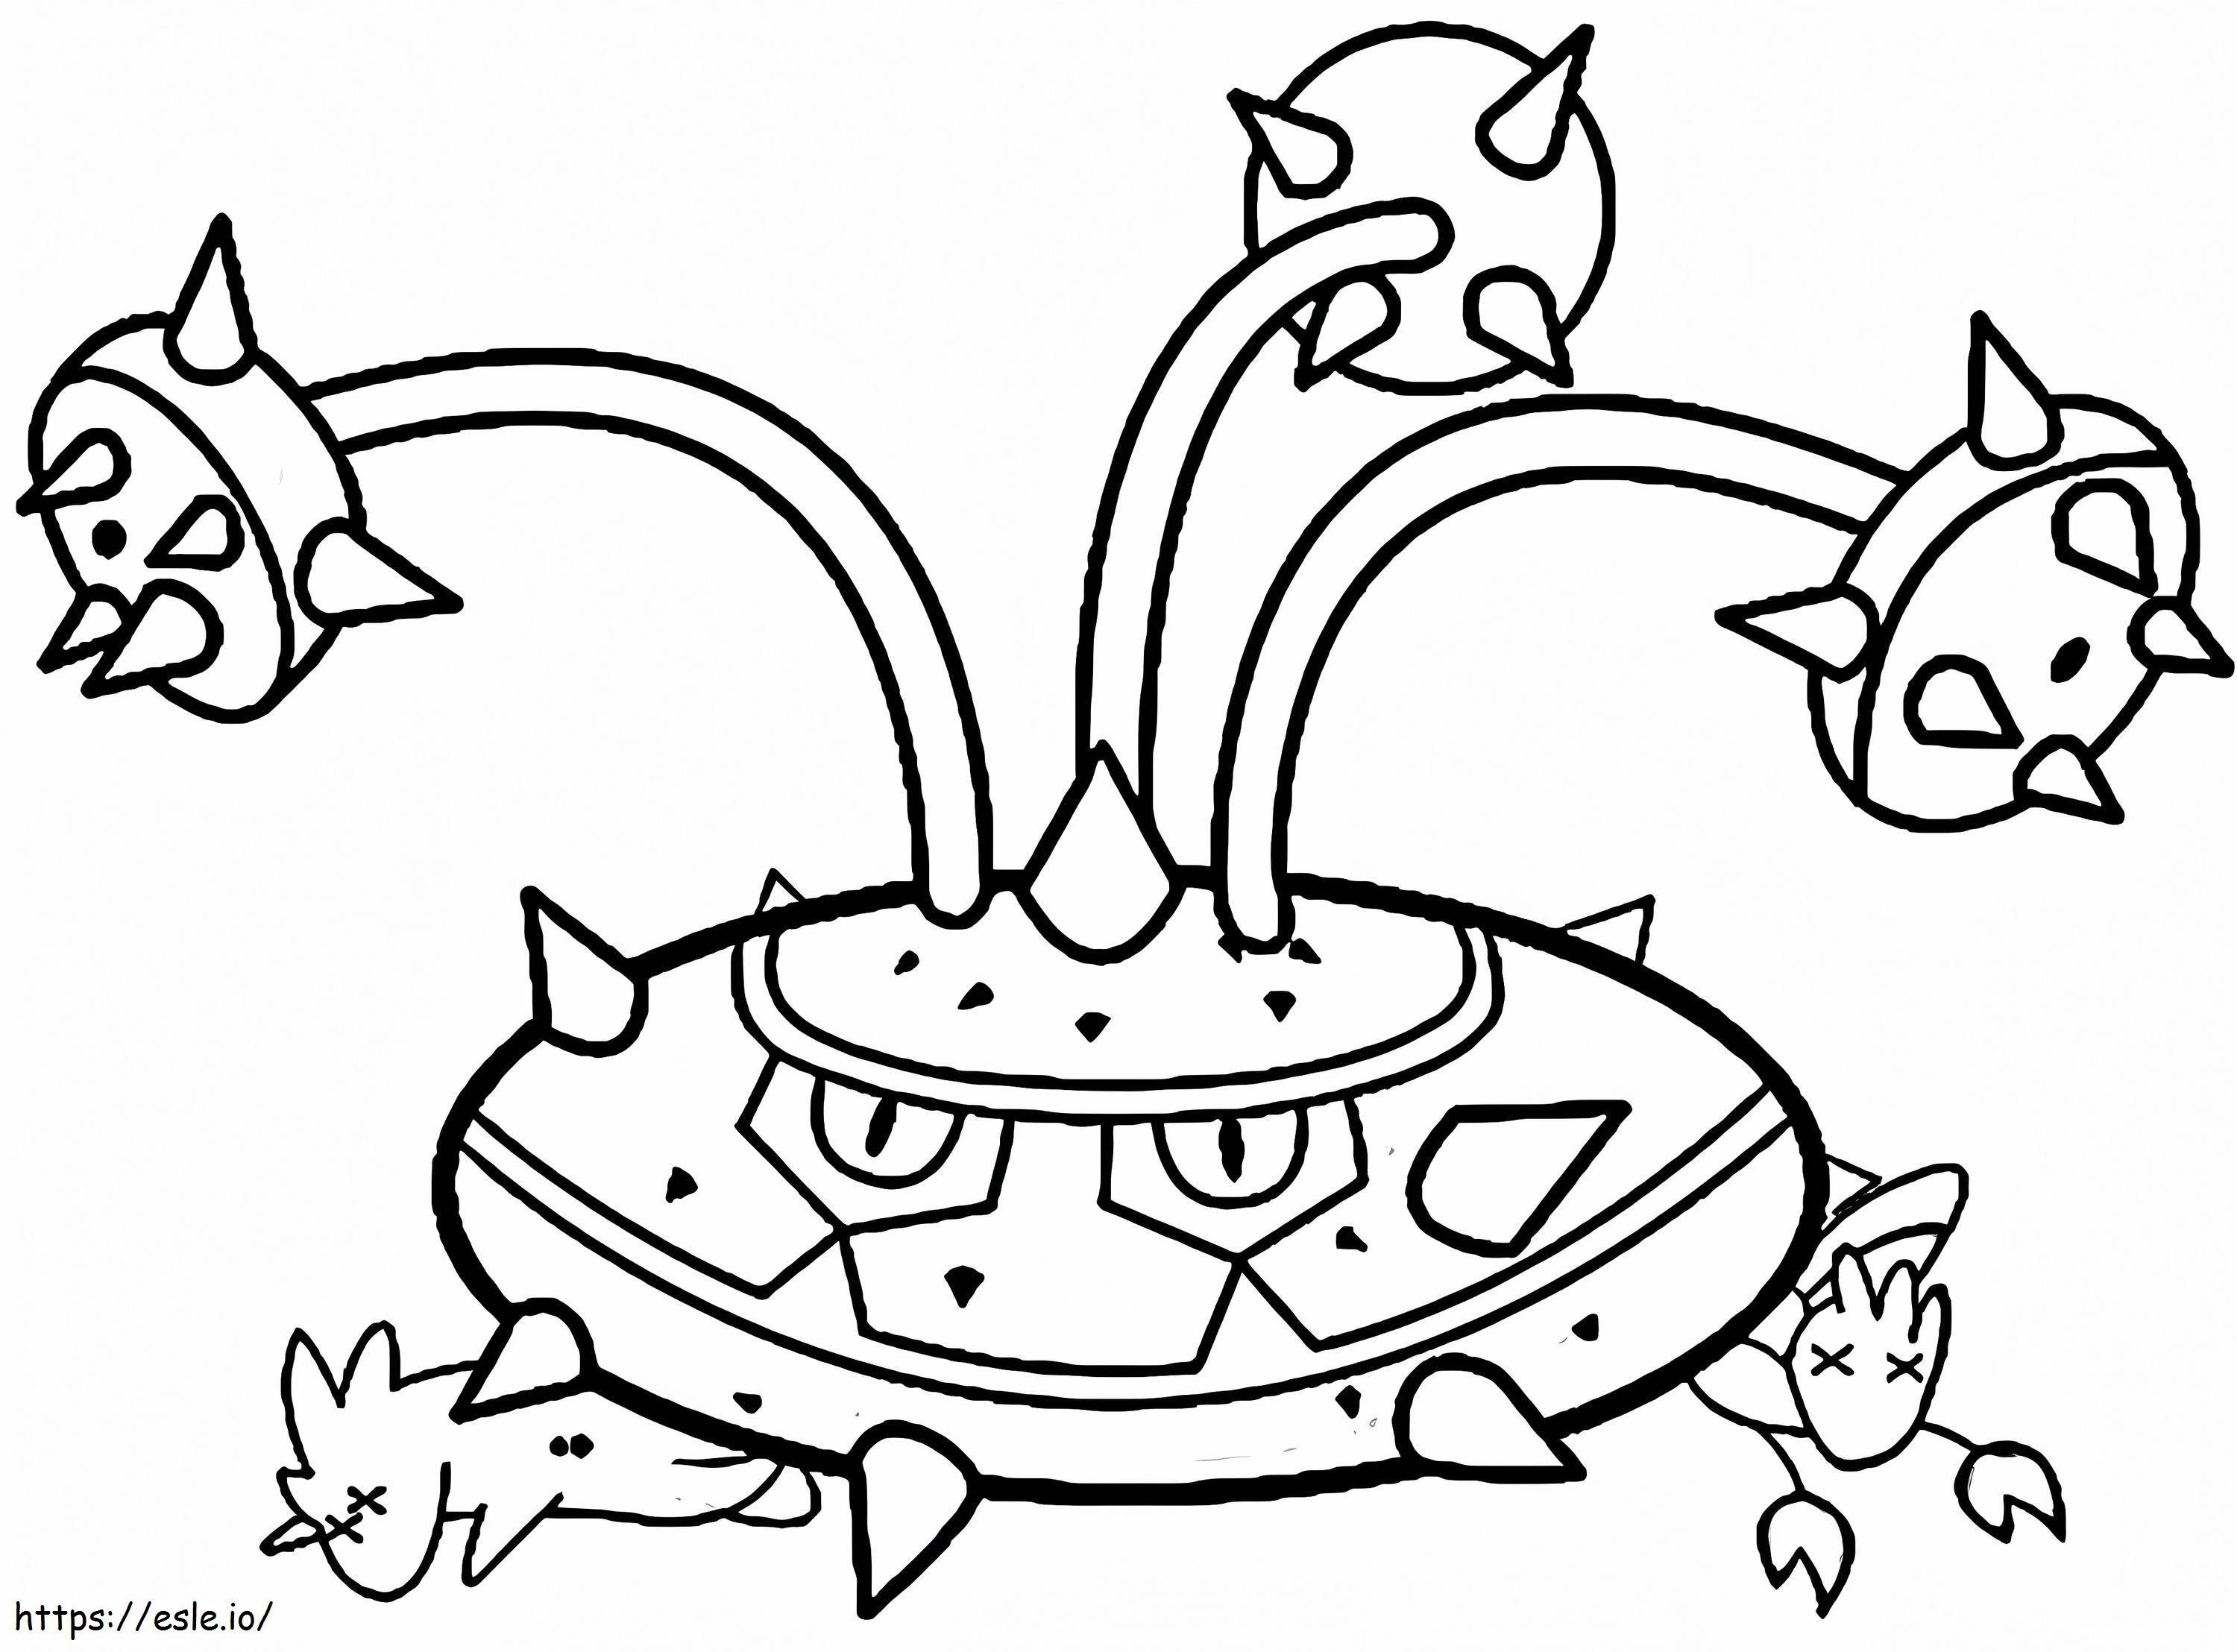 Ferrothorn Pokemon 4 coloring page